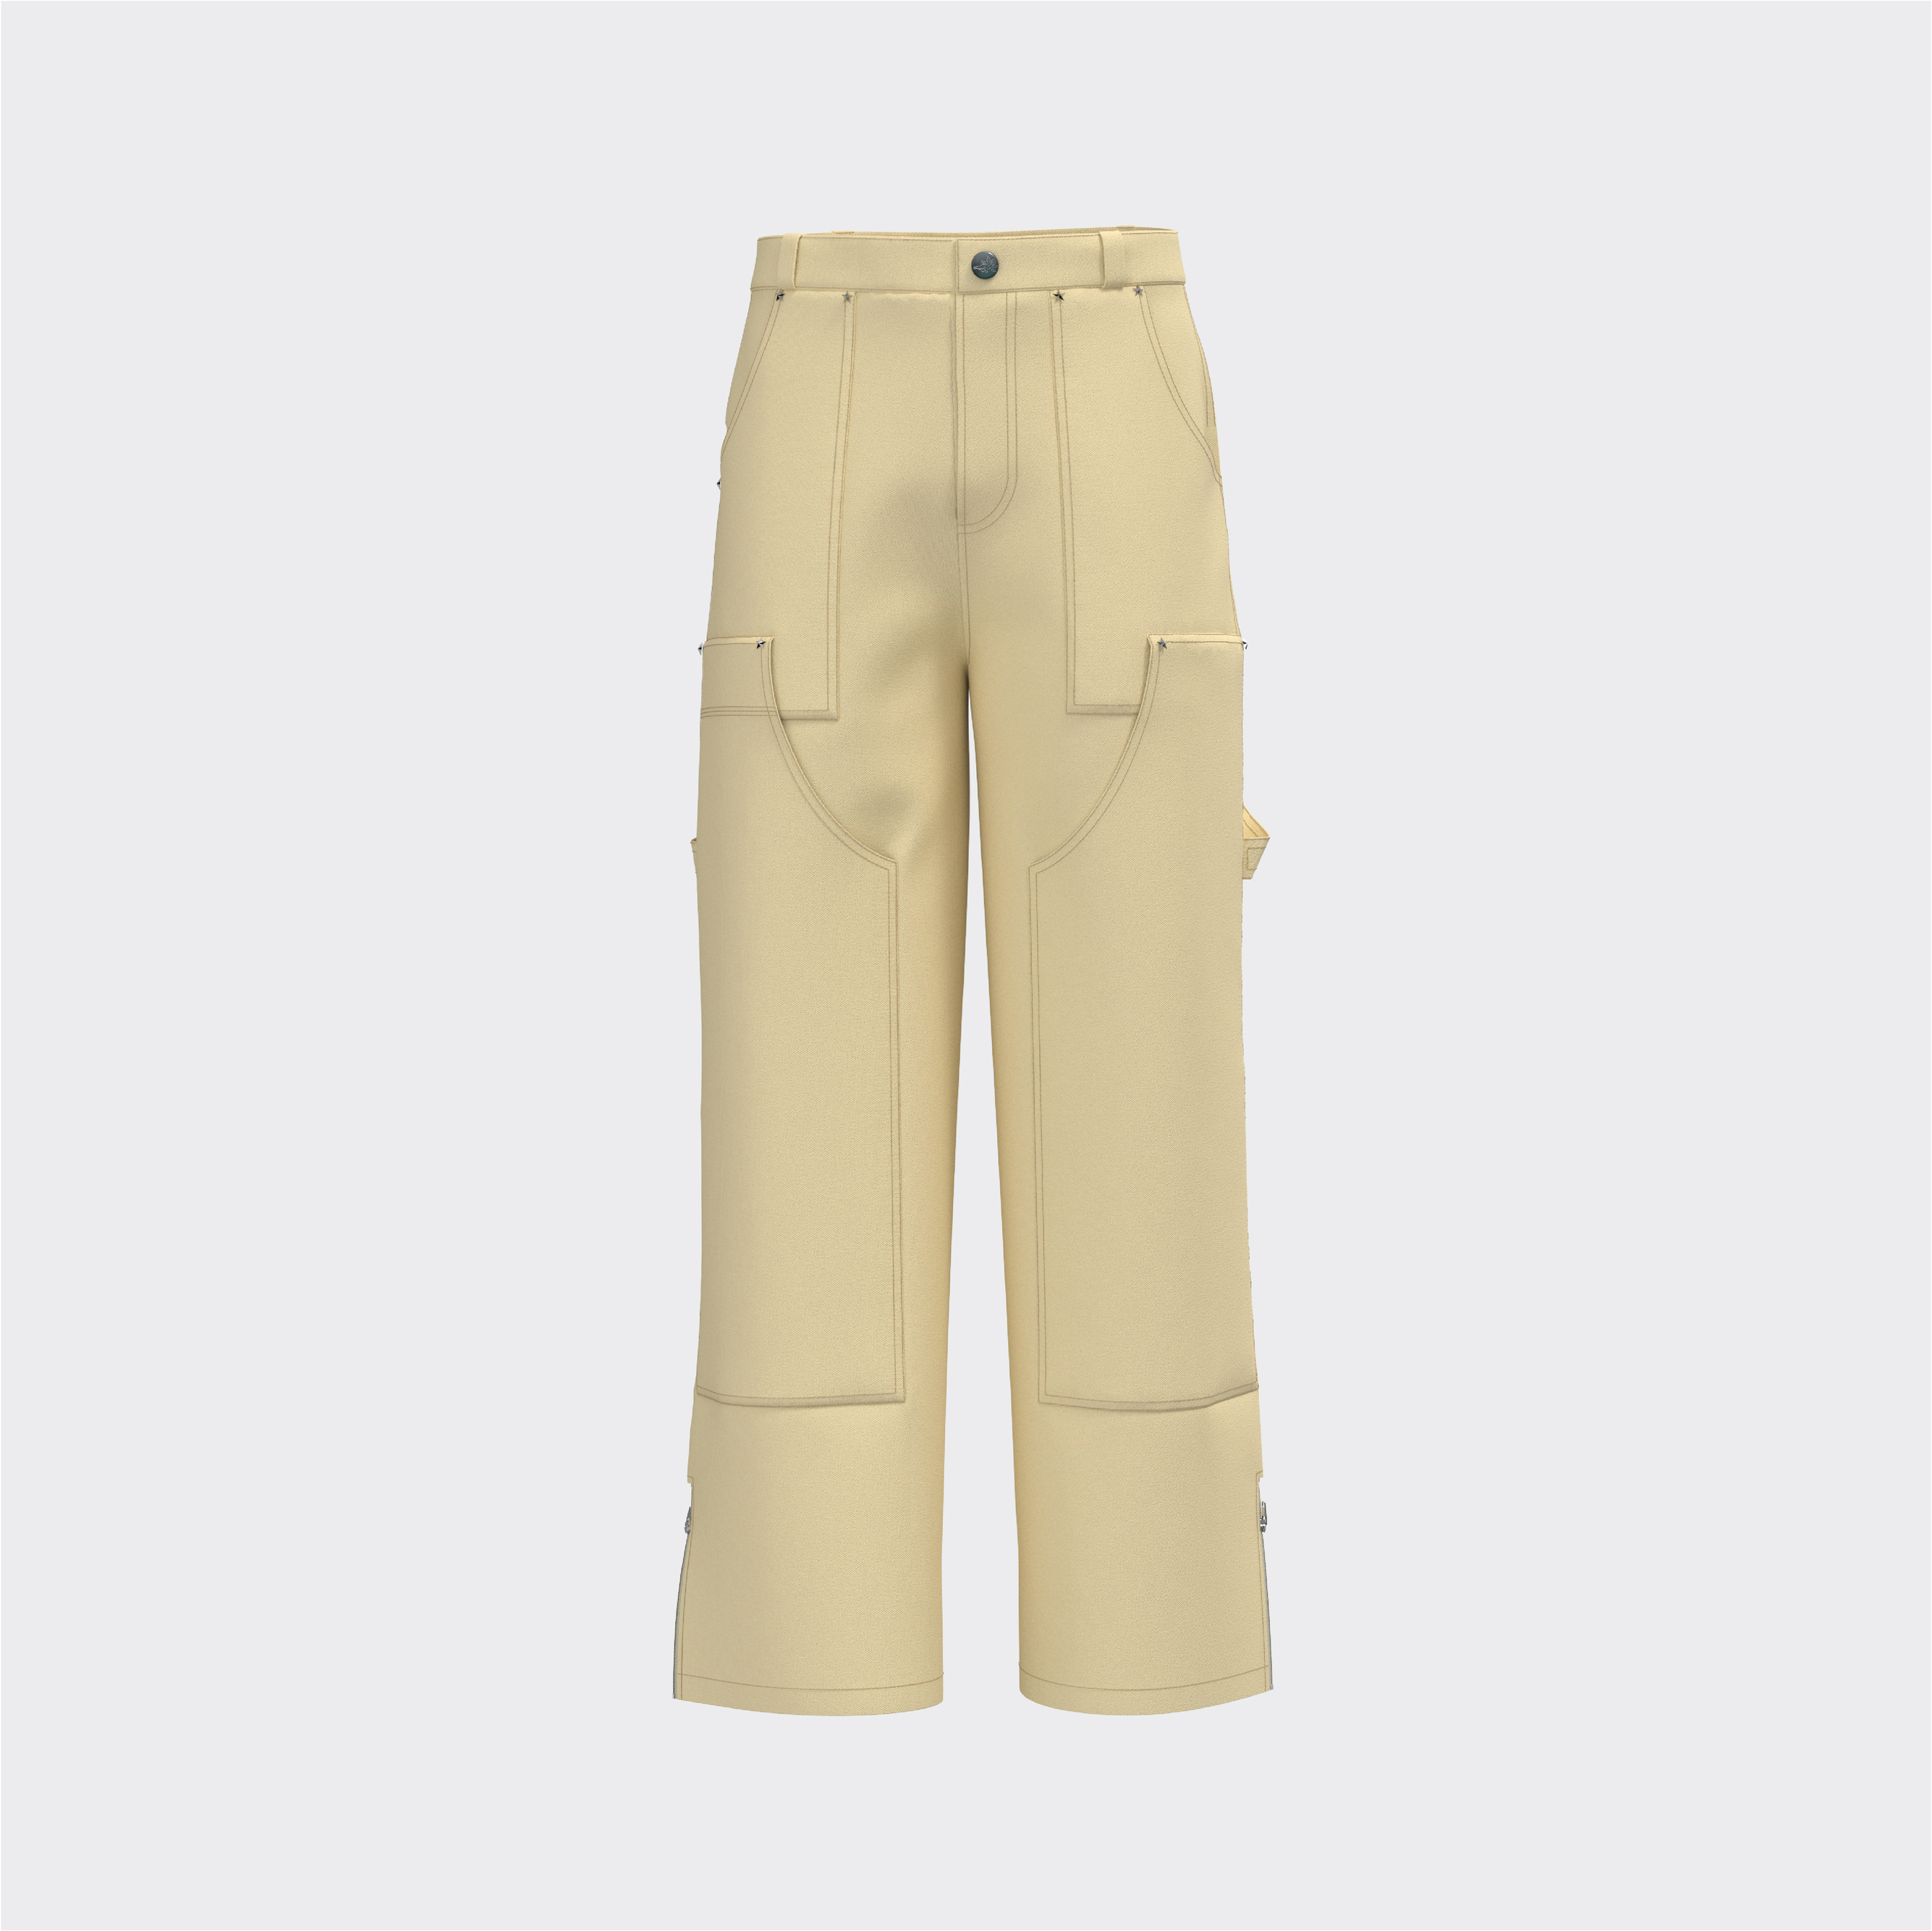 QUẦN DOUBLE KNEE CANVAS WORKWEAR